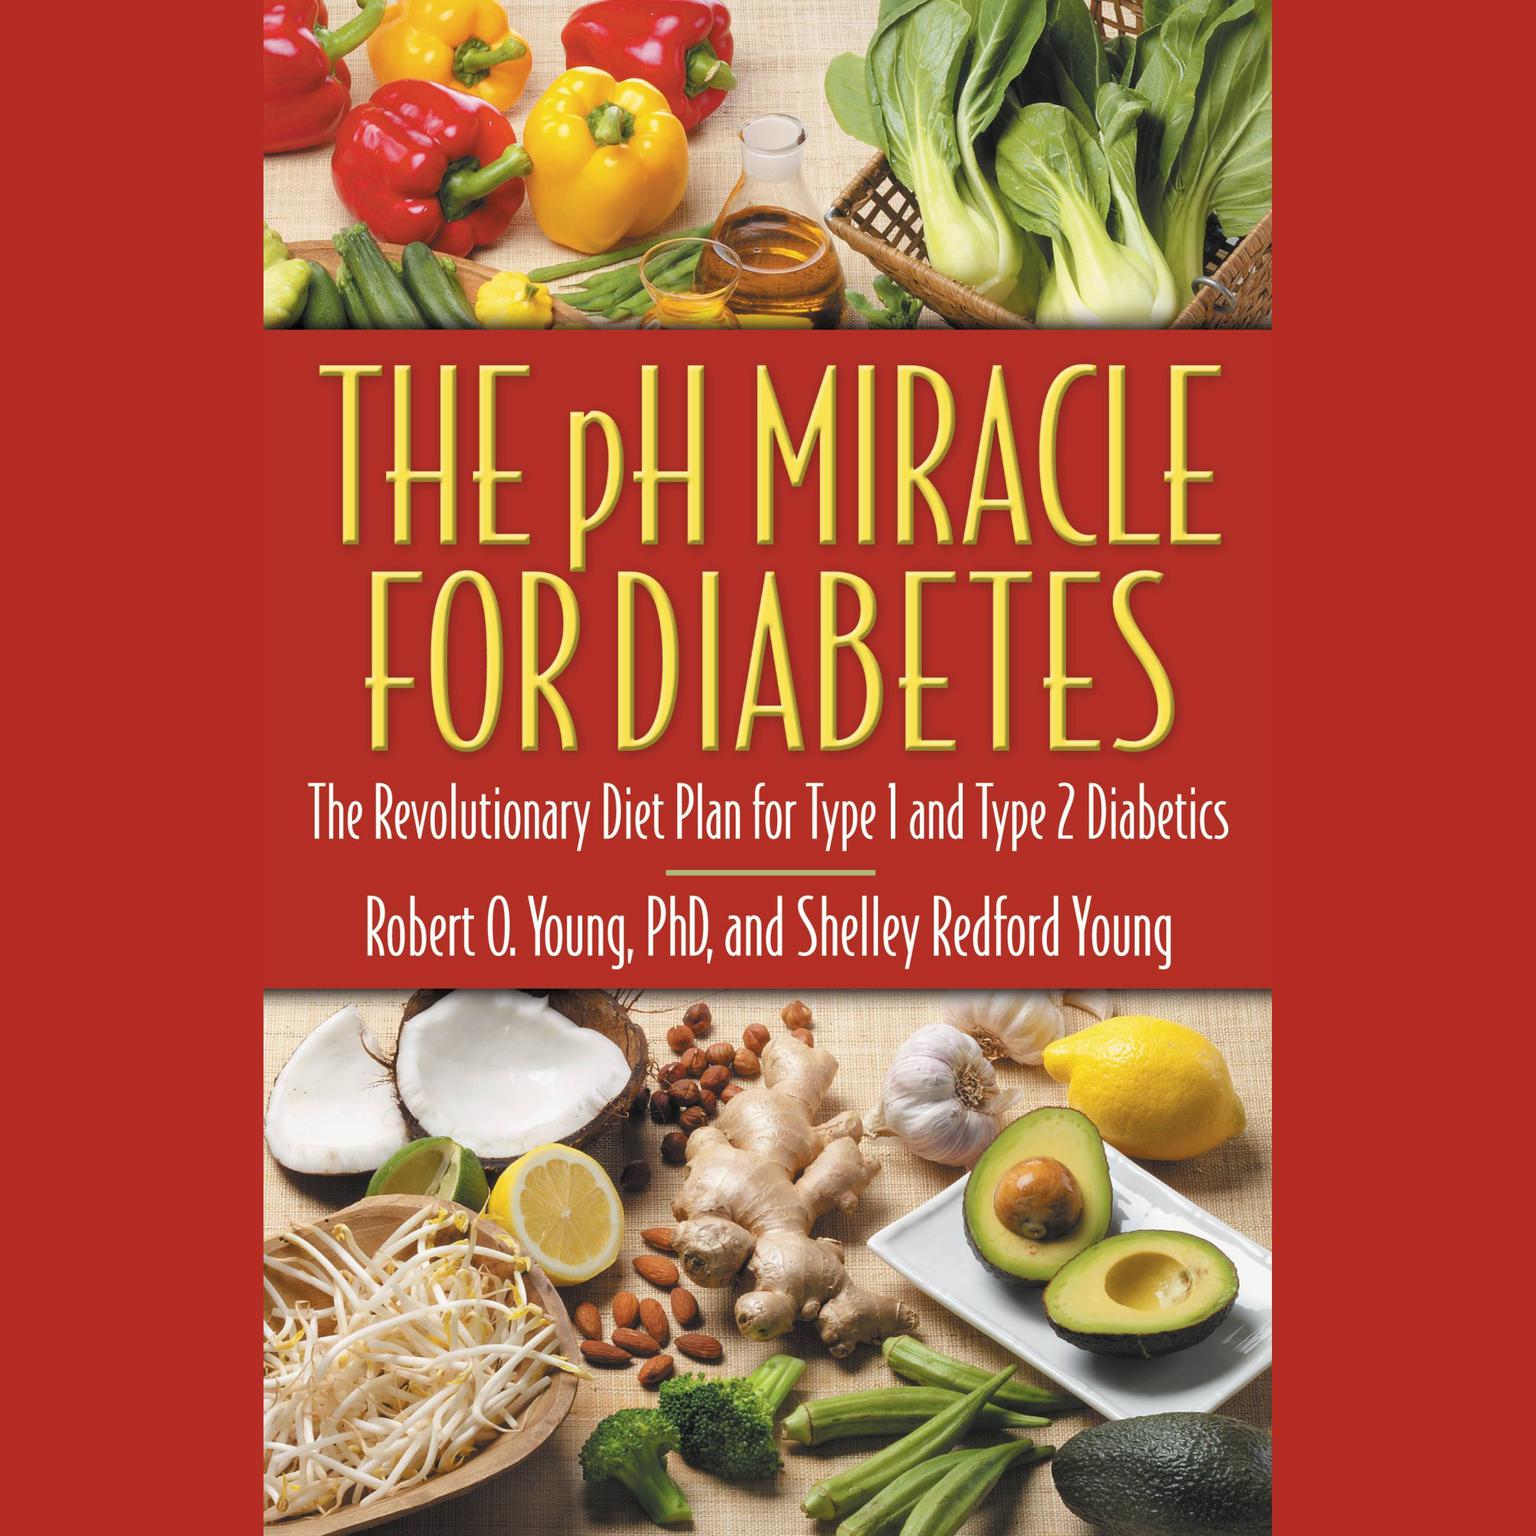 The pH Miracle for Diabetes: The Revolutionary Diet Plan for Type 1 and Type 2 Diabetics Audiobook, by Robert O. Young